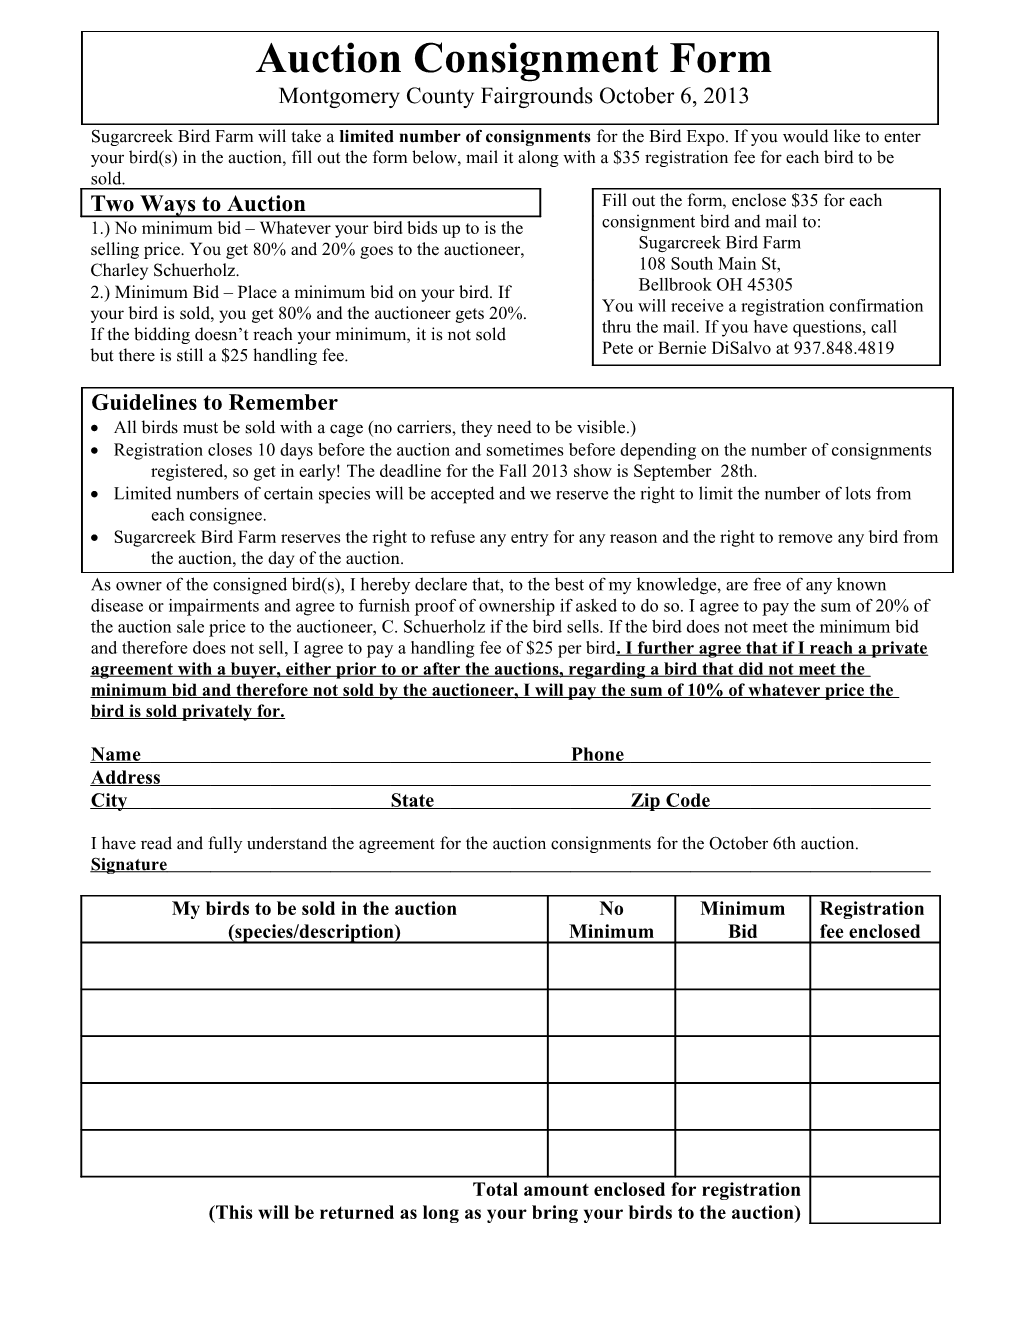 Auction Consignment Form